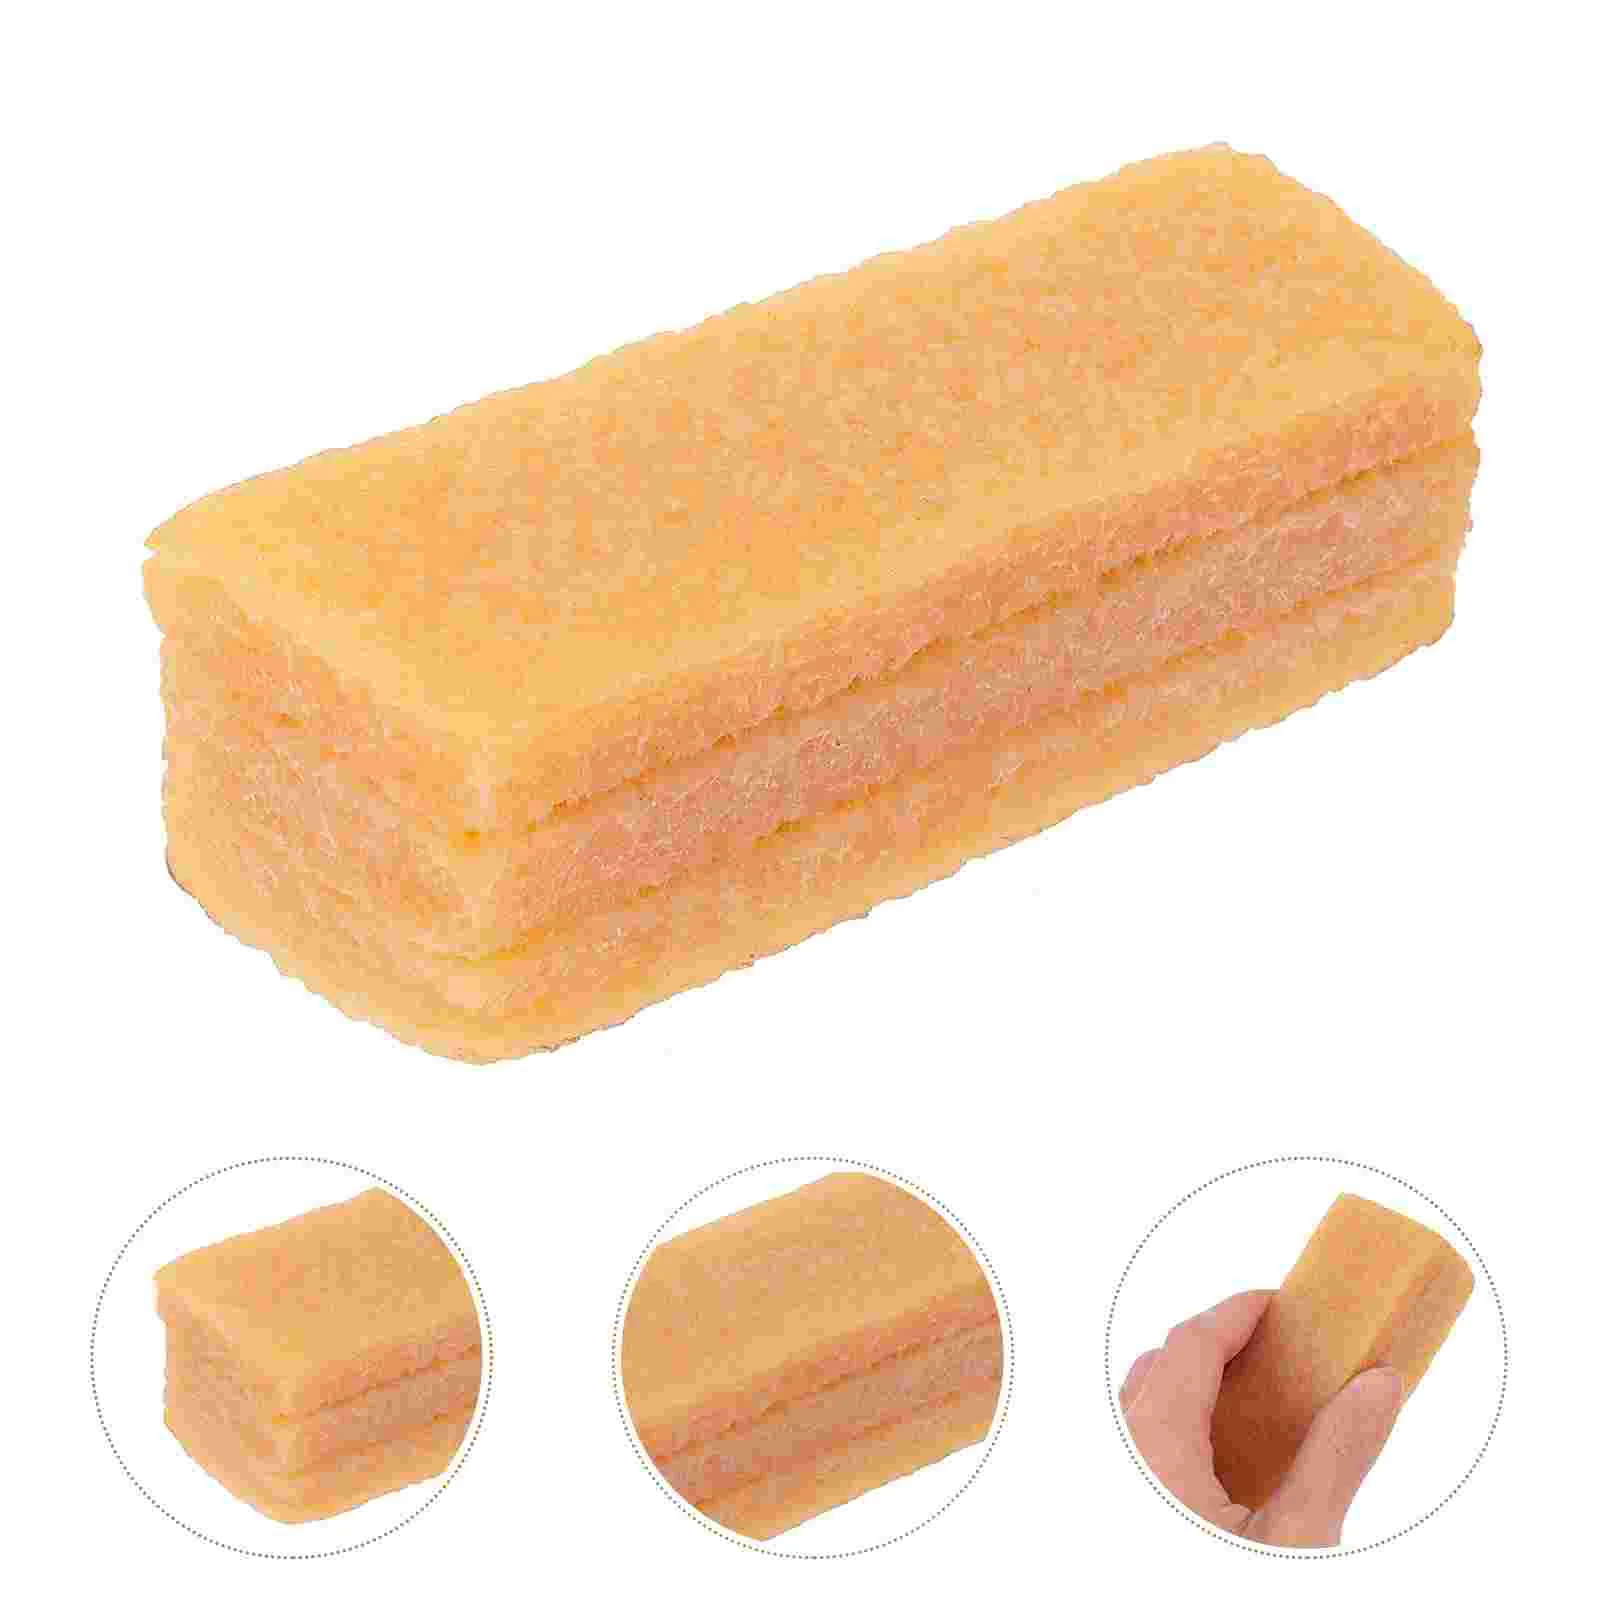 

Sandpaper Cleaning Block Accessories Skate Boards Skateboard Rubber Grip Tape Cleaners